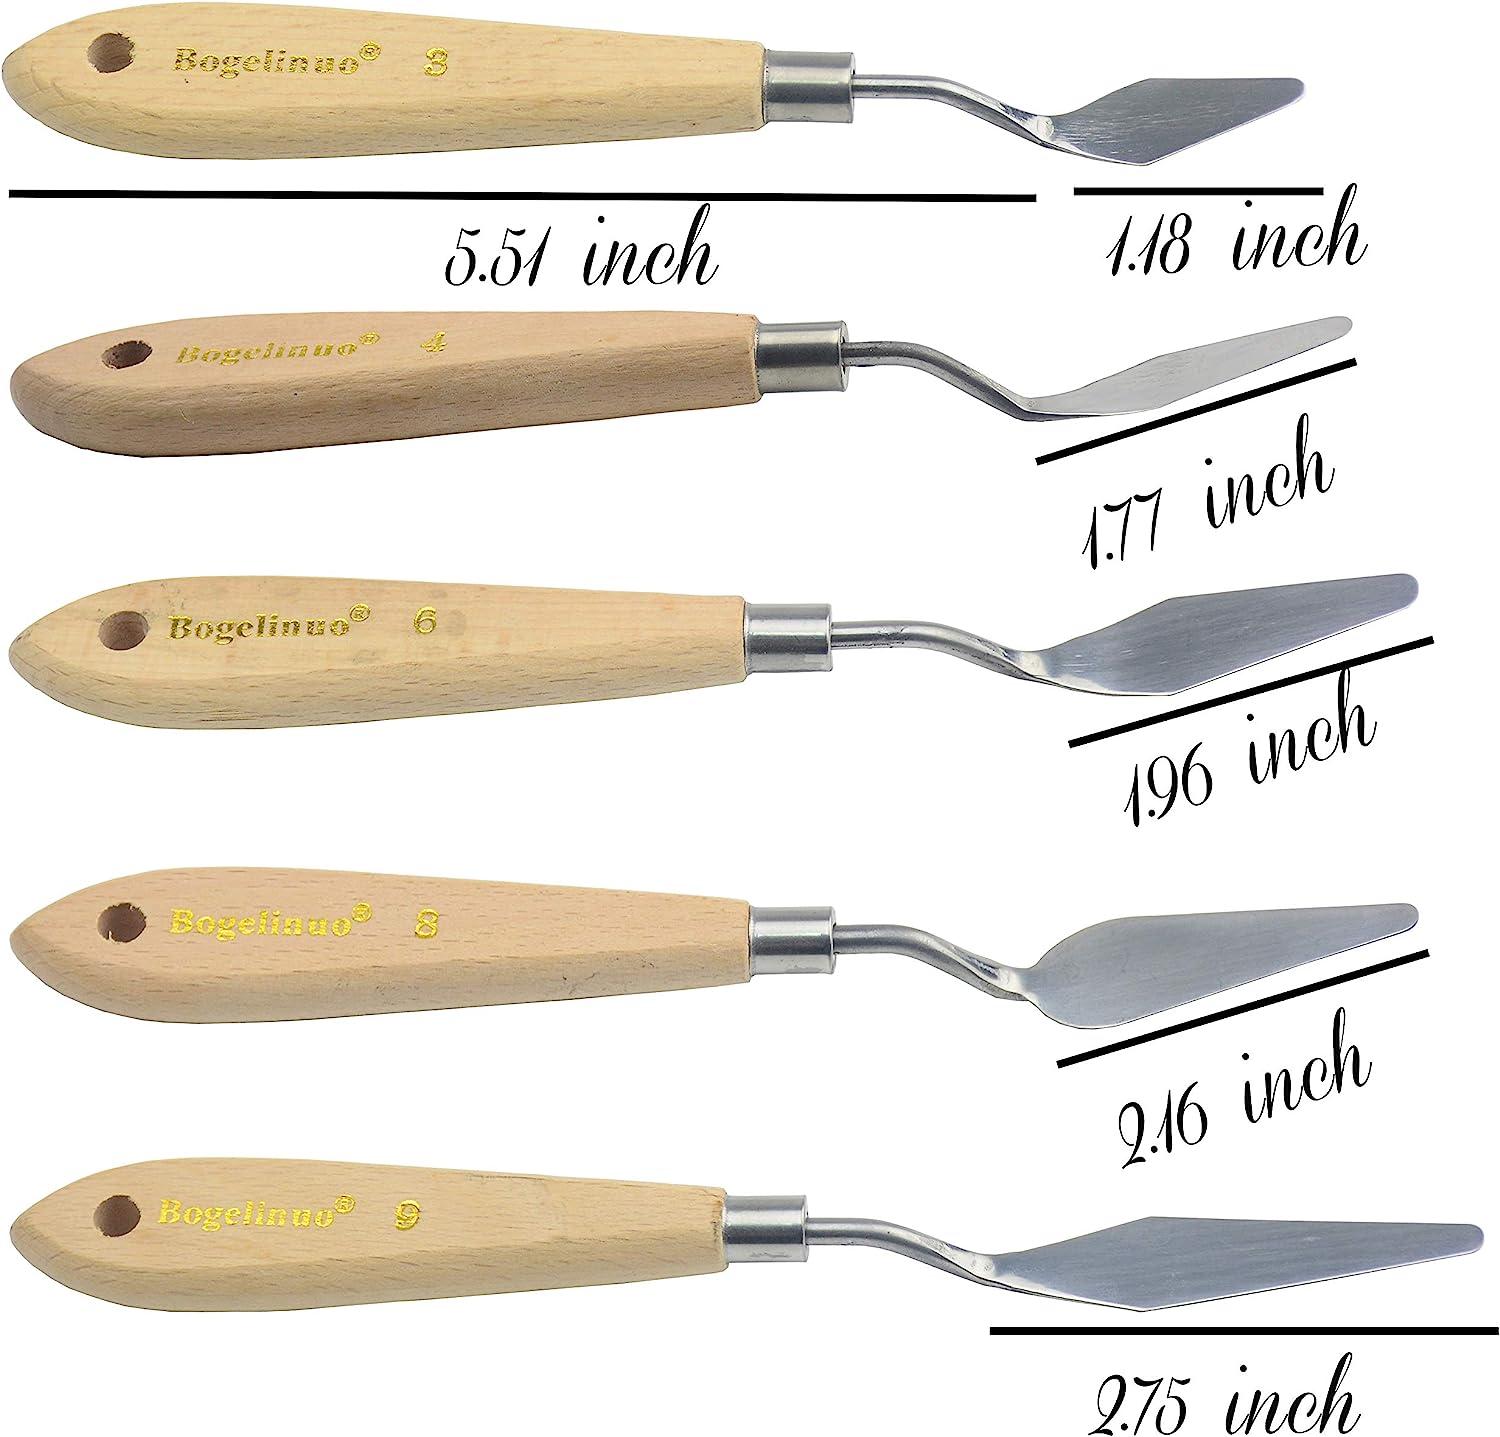 AebDerp 5 pcs Palette Knife Art Tools with Wooden Knife Handle